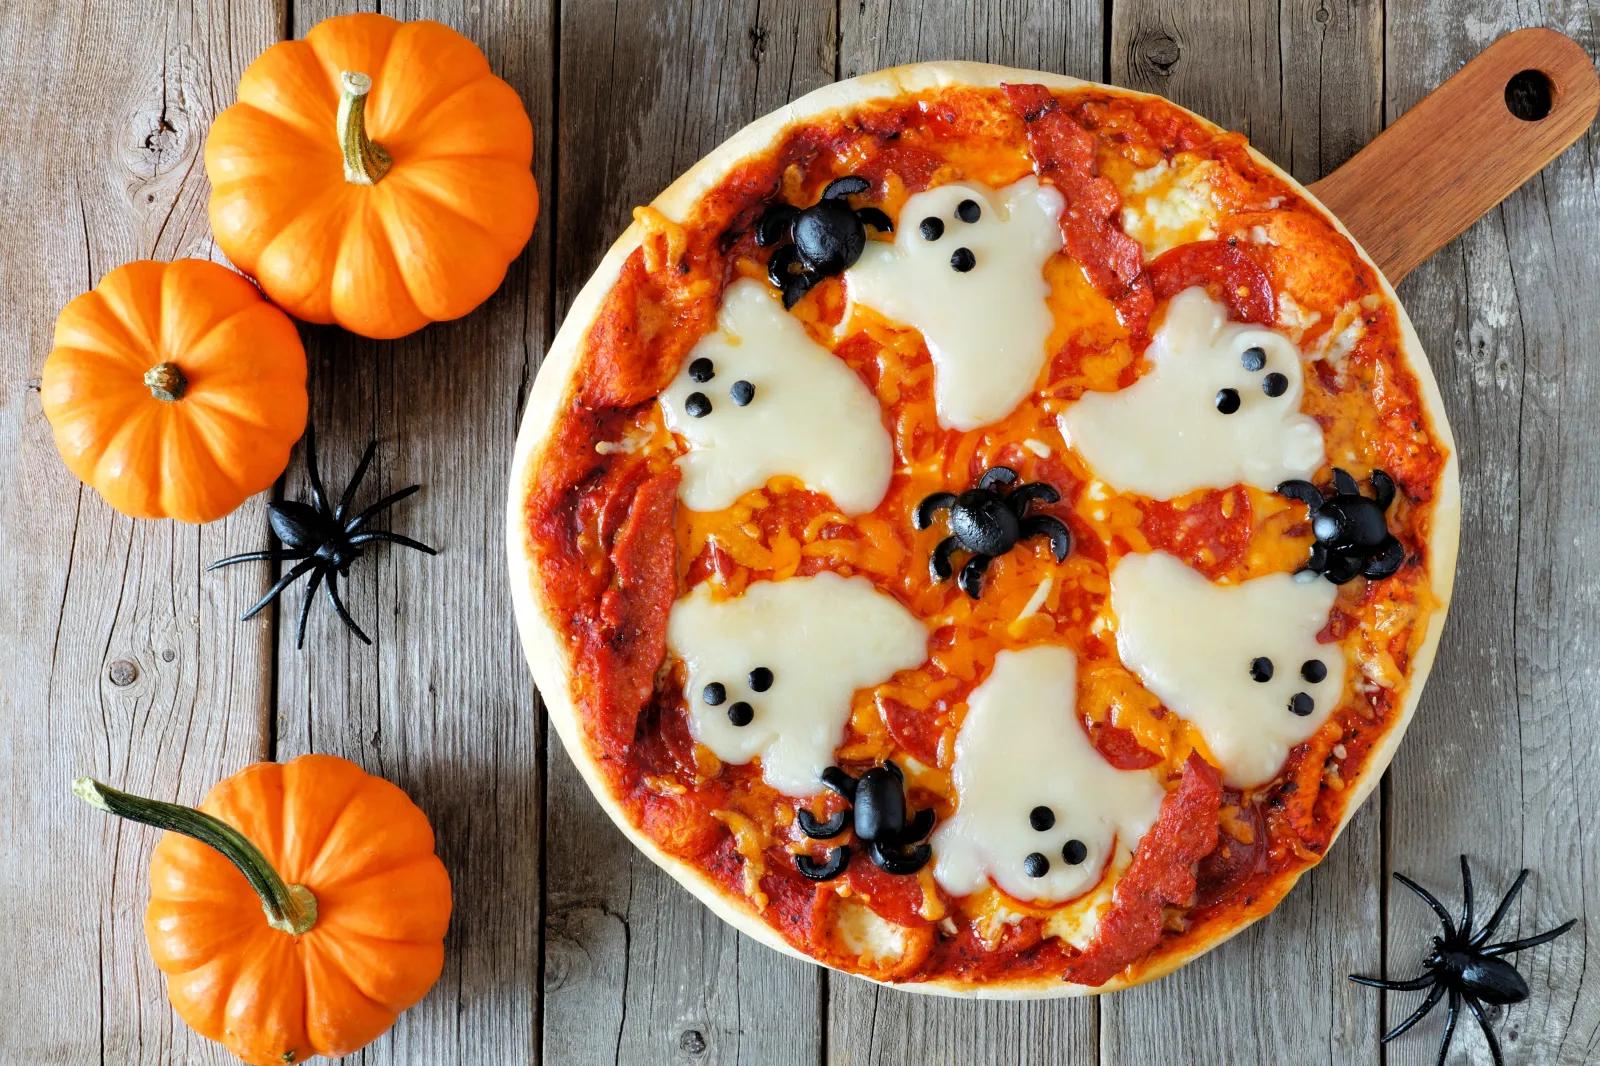 Halloween pizza recipe with ghosts and spiders